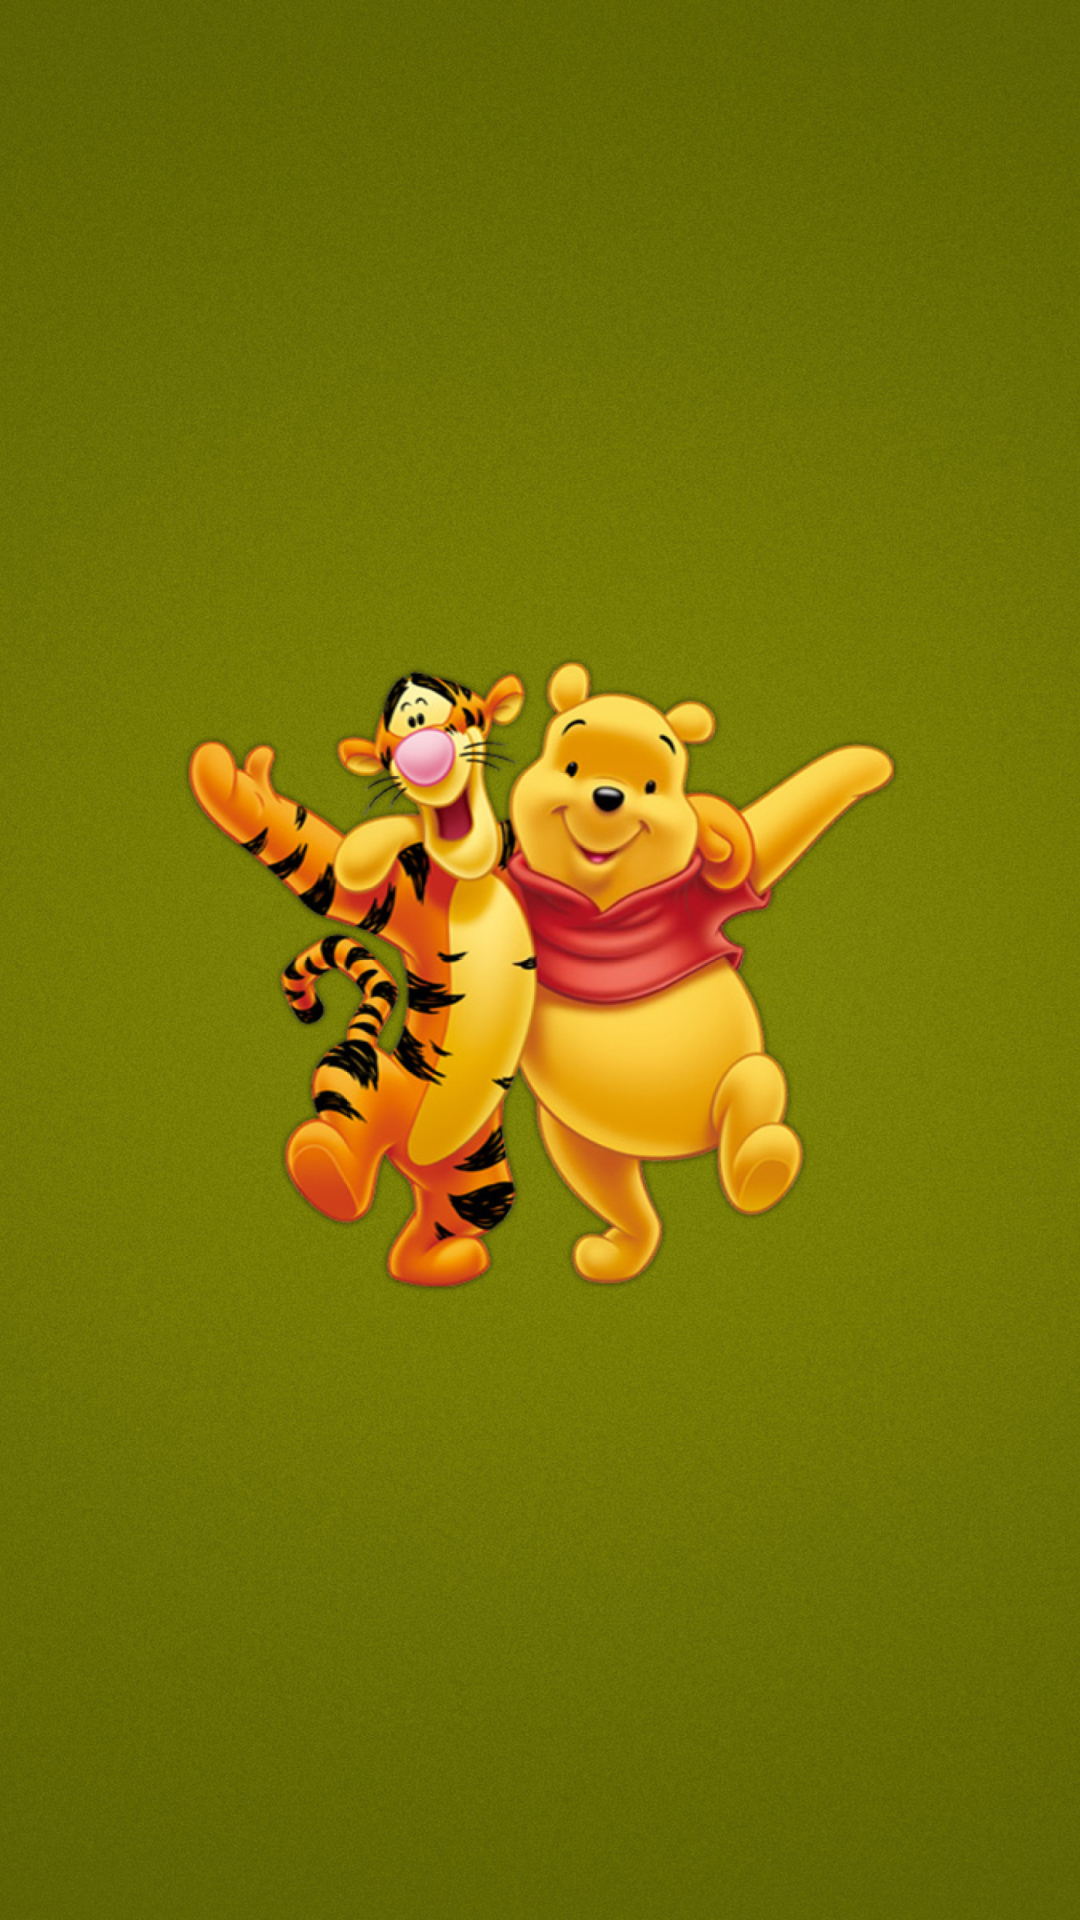 Winnie The Pooh And Tiger Wallpaper for iPhone 8 Plus.